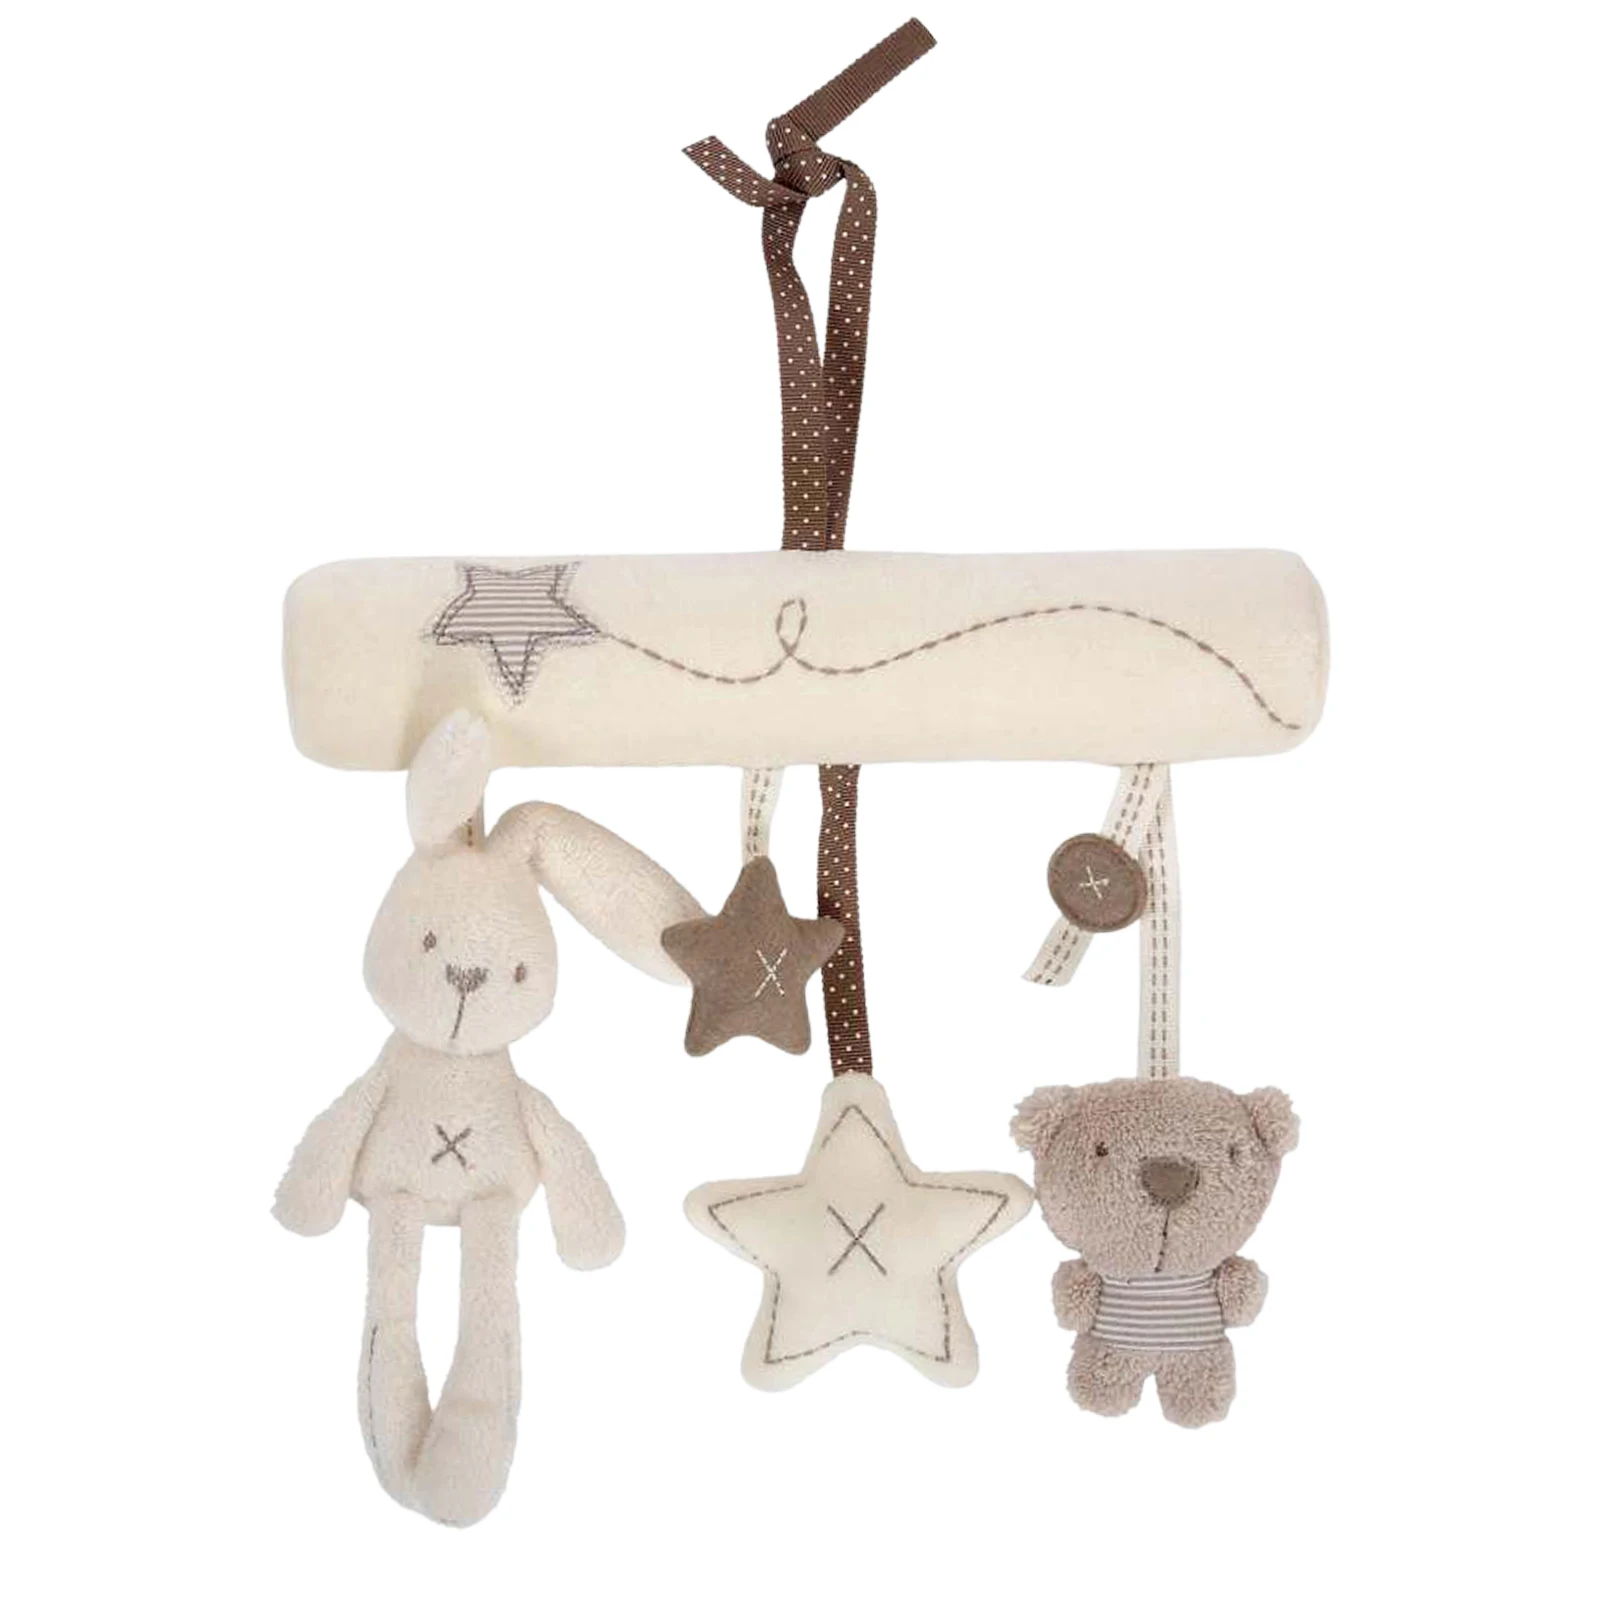 

Dangling Rattle Toys For Stroller Baby Stroller Toys For Infants Cute Bunny Bear Star Rattles Crib Car Seat Toys For Babies Boys